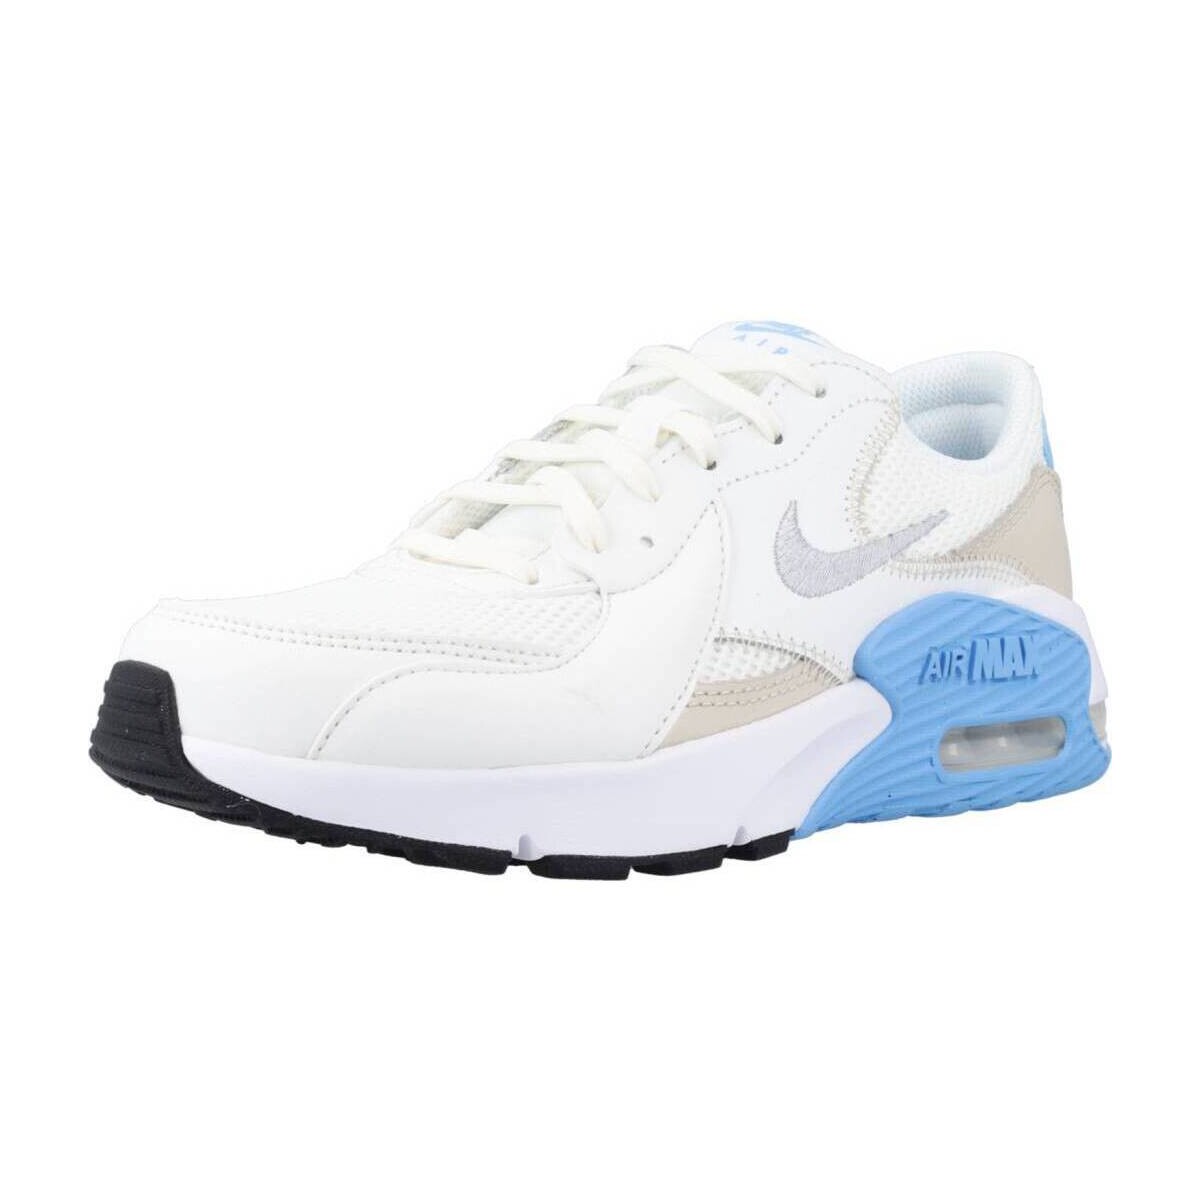 Scarpe Donna Sneakers Nike AIR MAX EXCEE Bianco